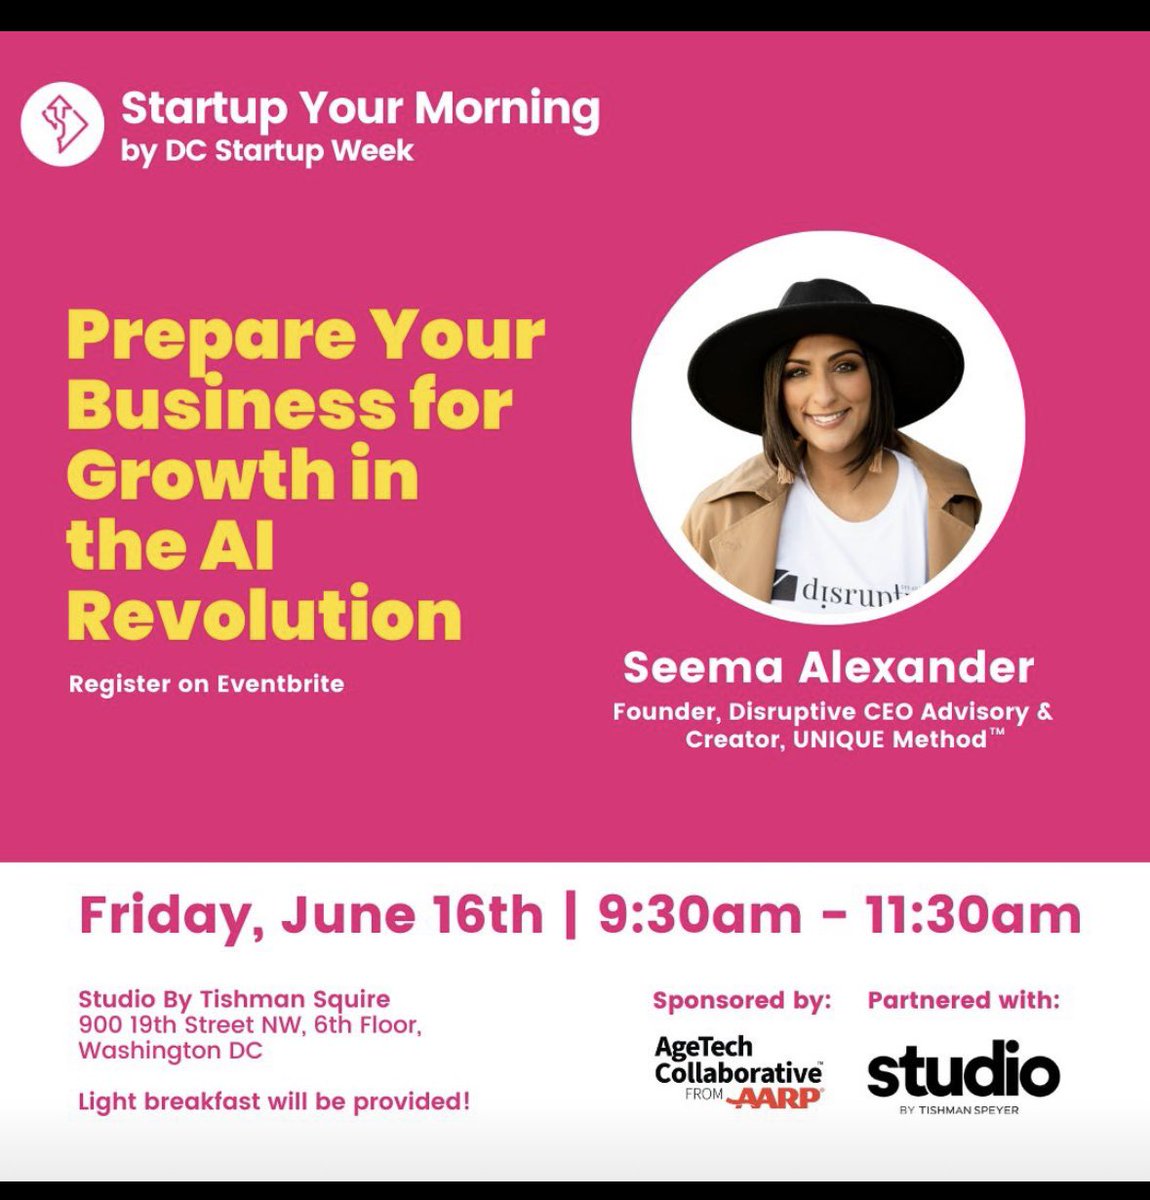 DC/MD/VA founders come join me for my talk tomorrow on 'Preparing your business for the AI revolution' as part of the Start up Your Morning series powered by @DCstartupweek! If you haven't registered, please go to:  shorturl.at/fESTX and use promo code: DCSWCommunity for a…